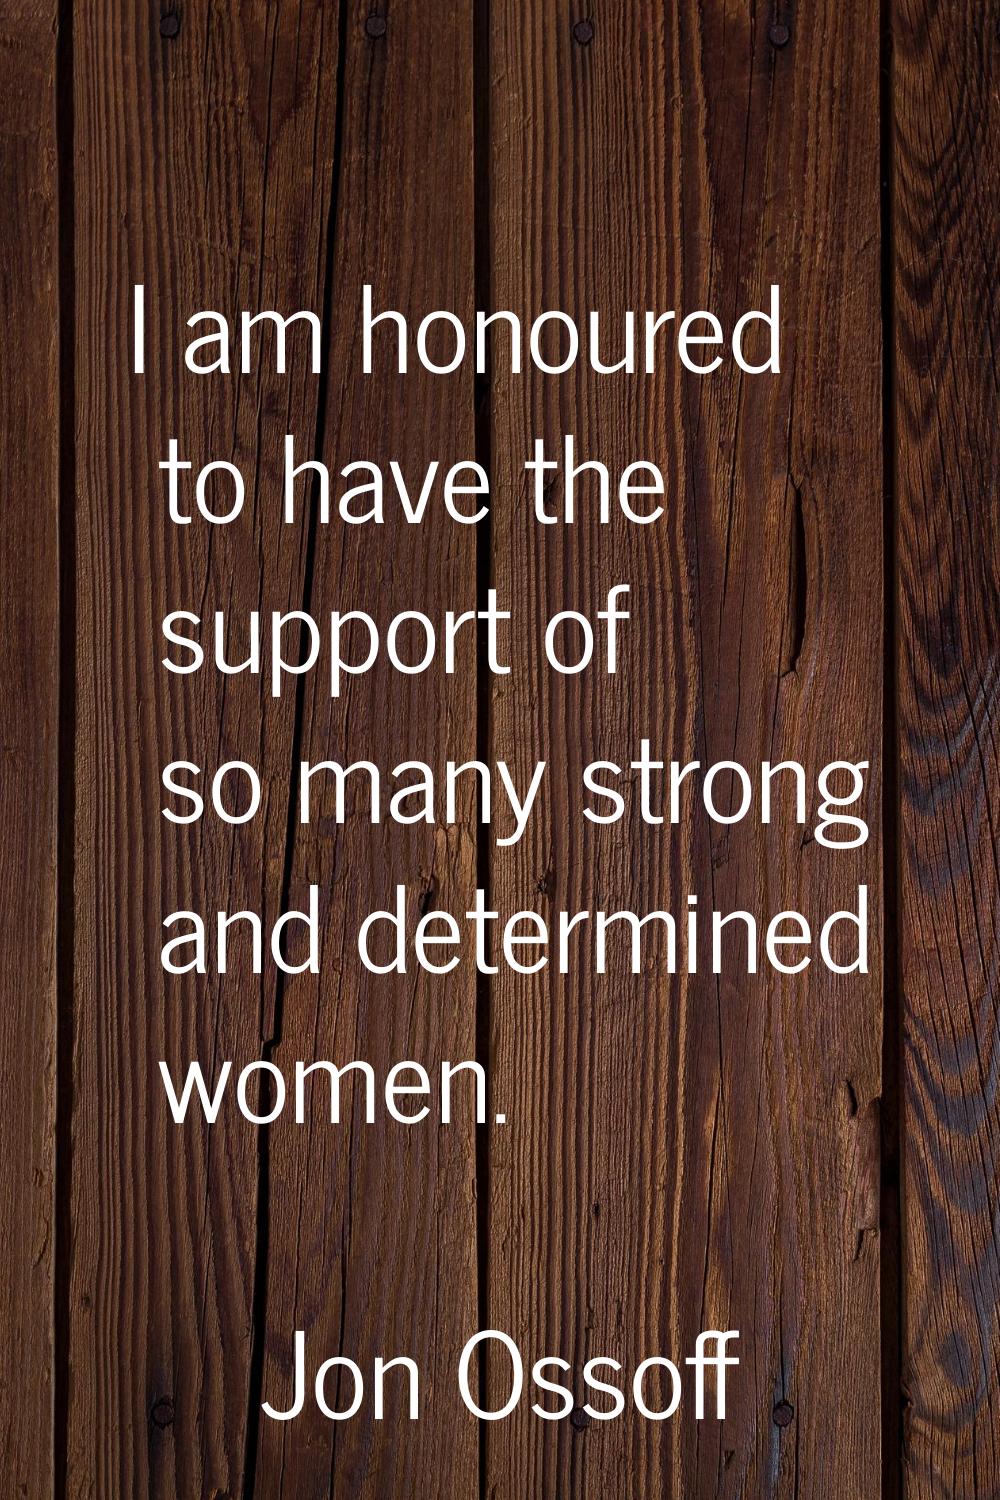 I am honoured to have the support of so many strong and determined women.